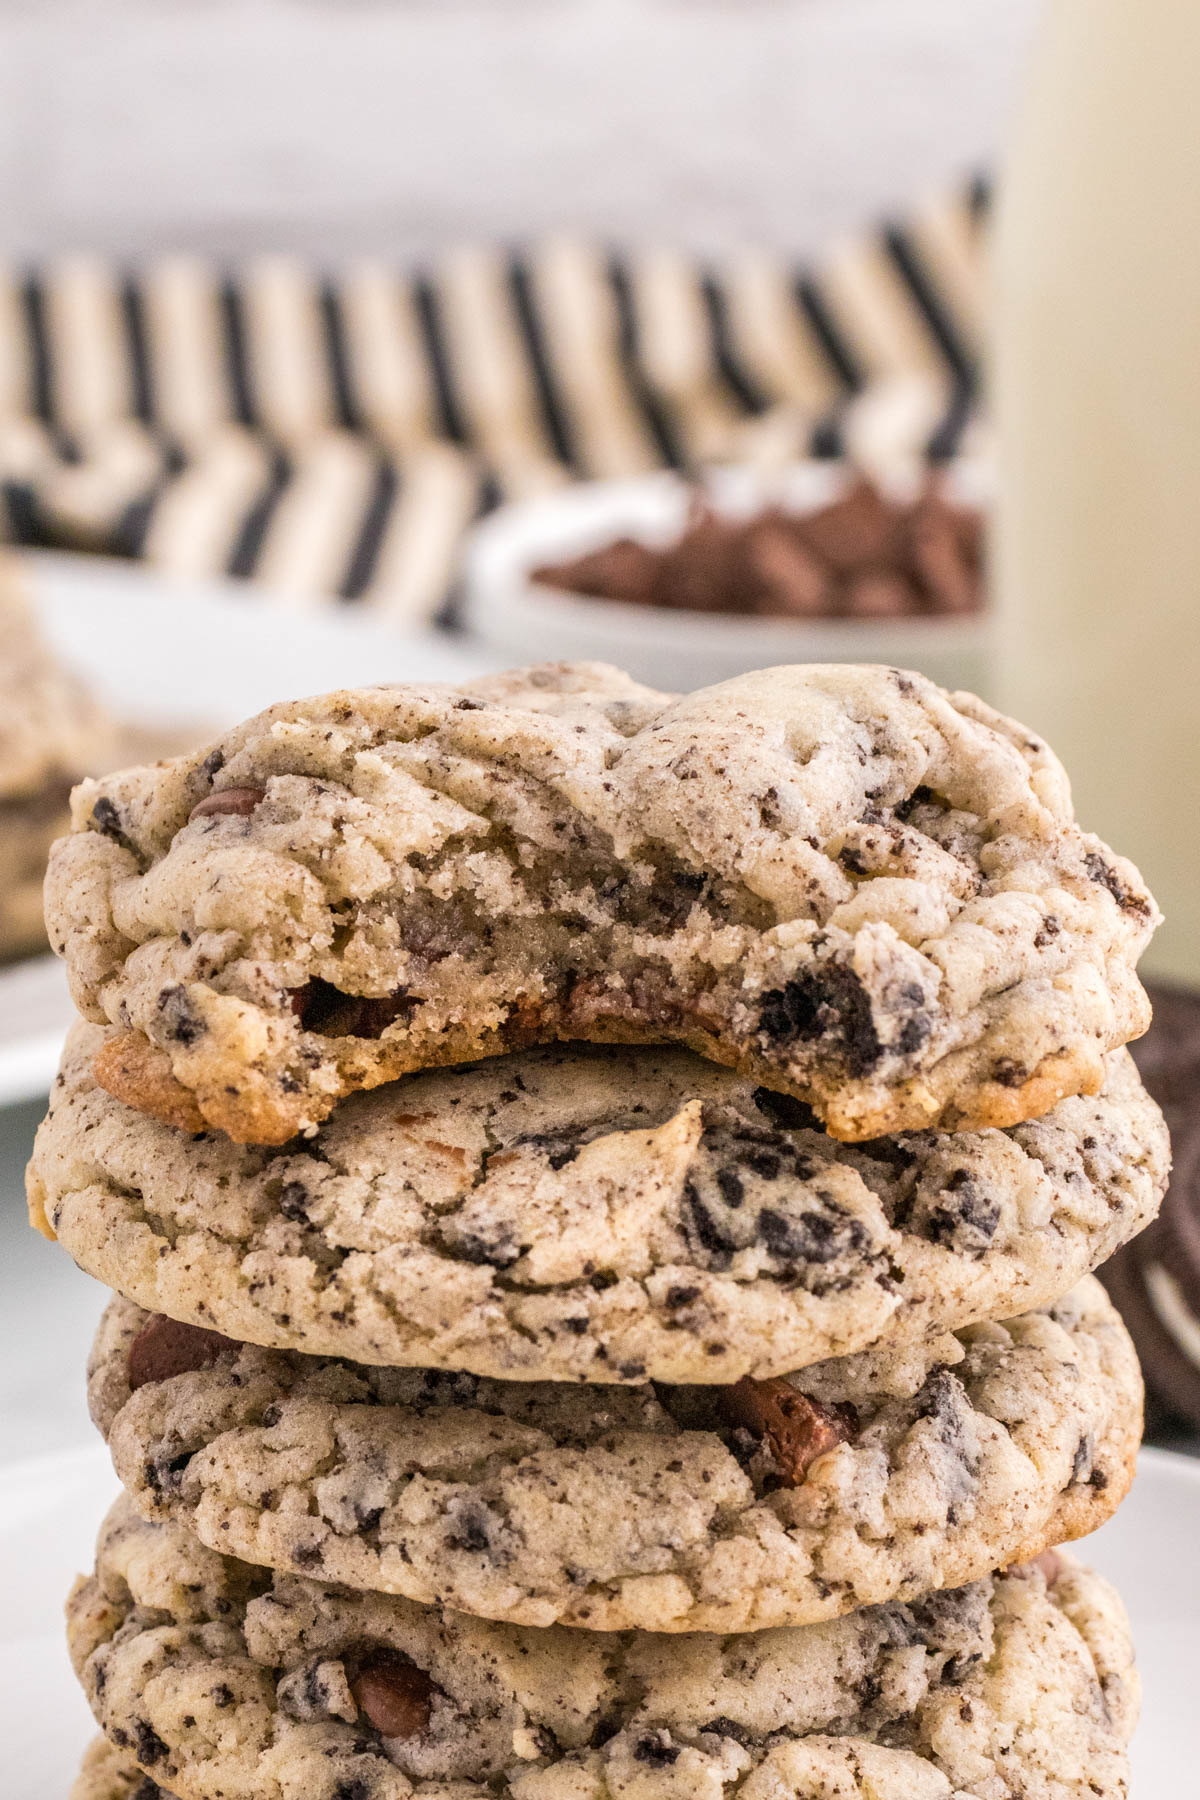 A stack of Oreo chocolate chip cookies on a plate with a blurred background.